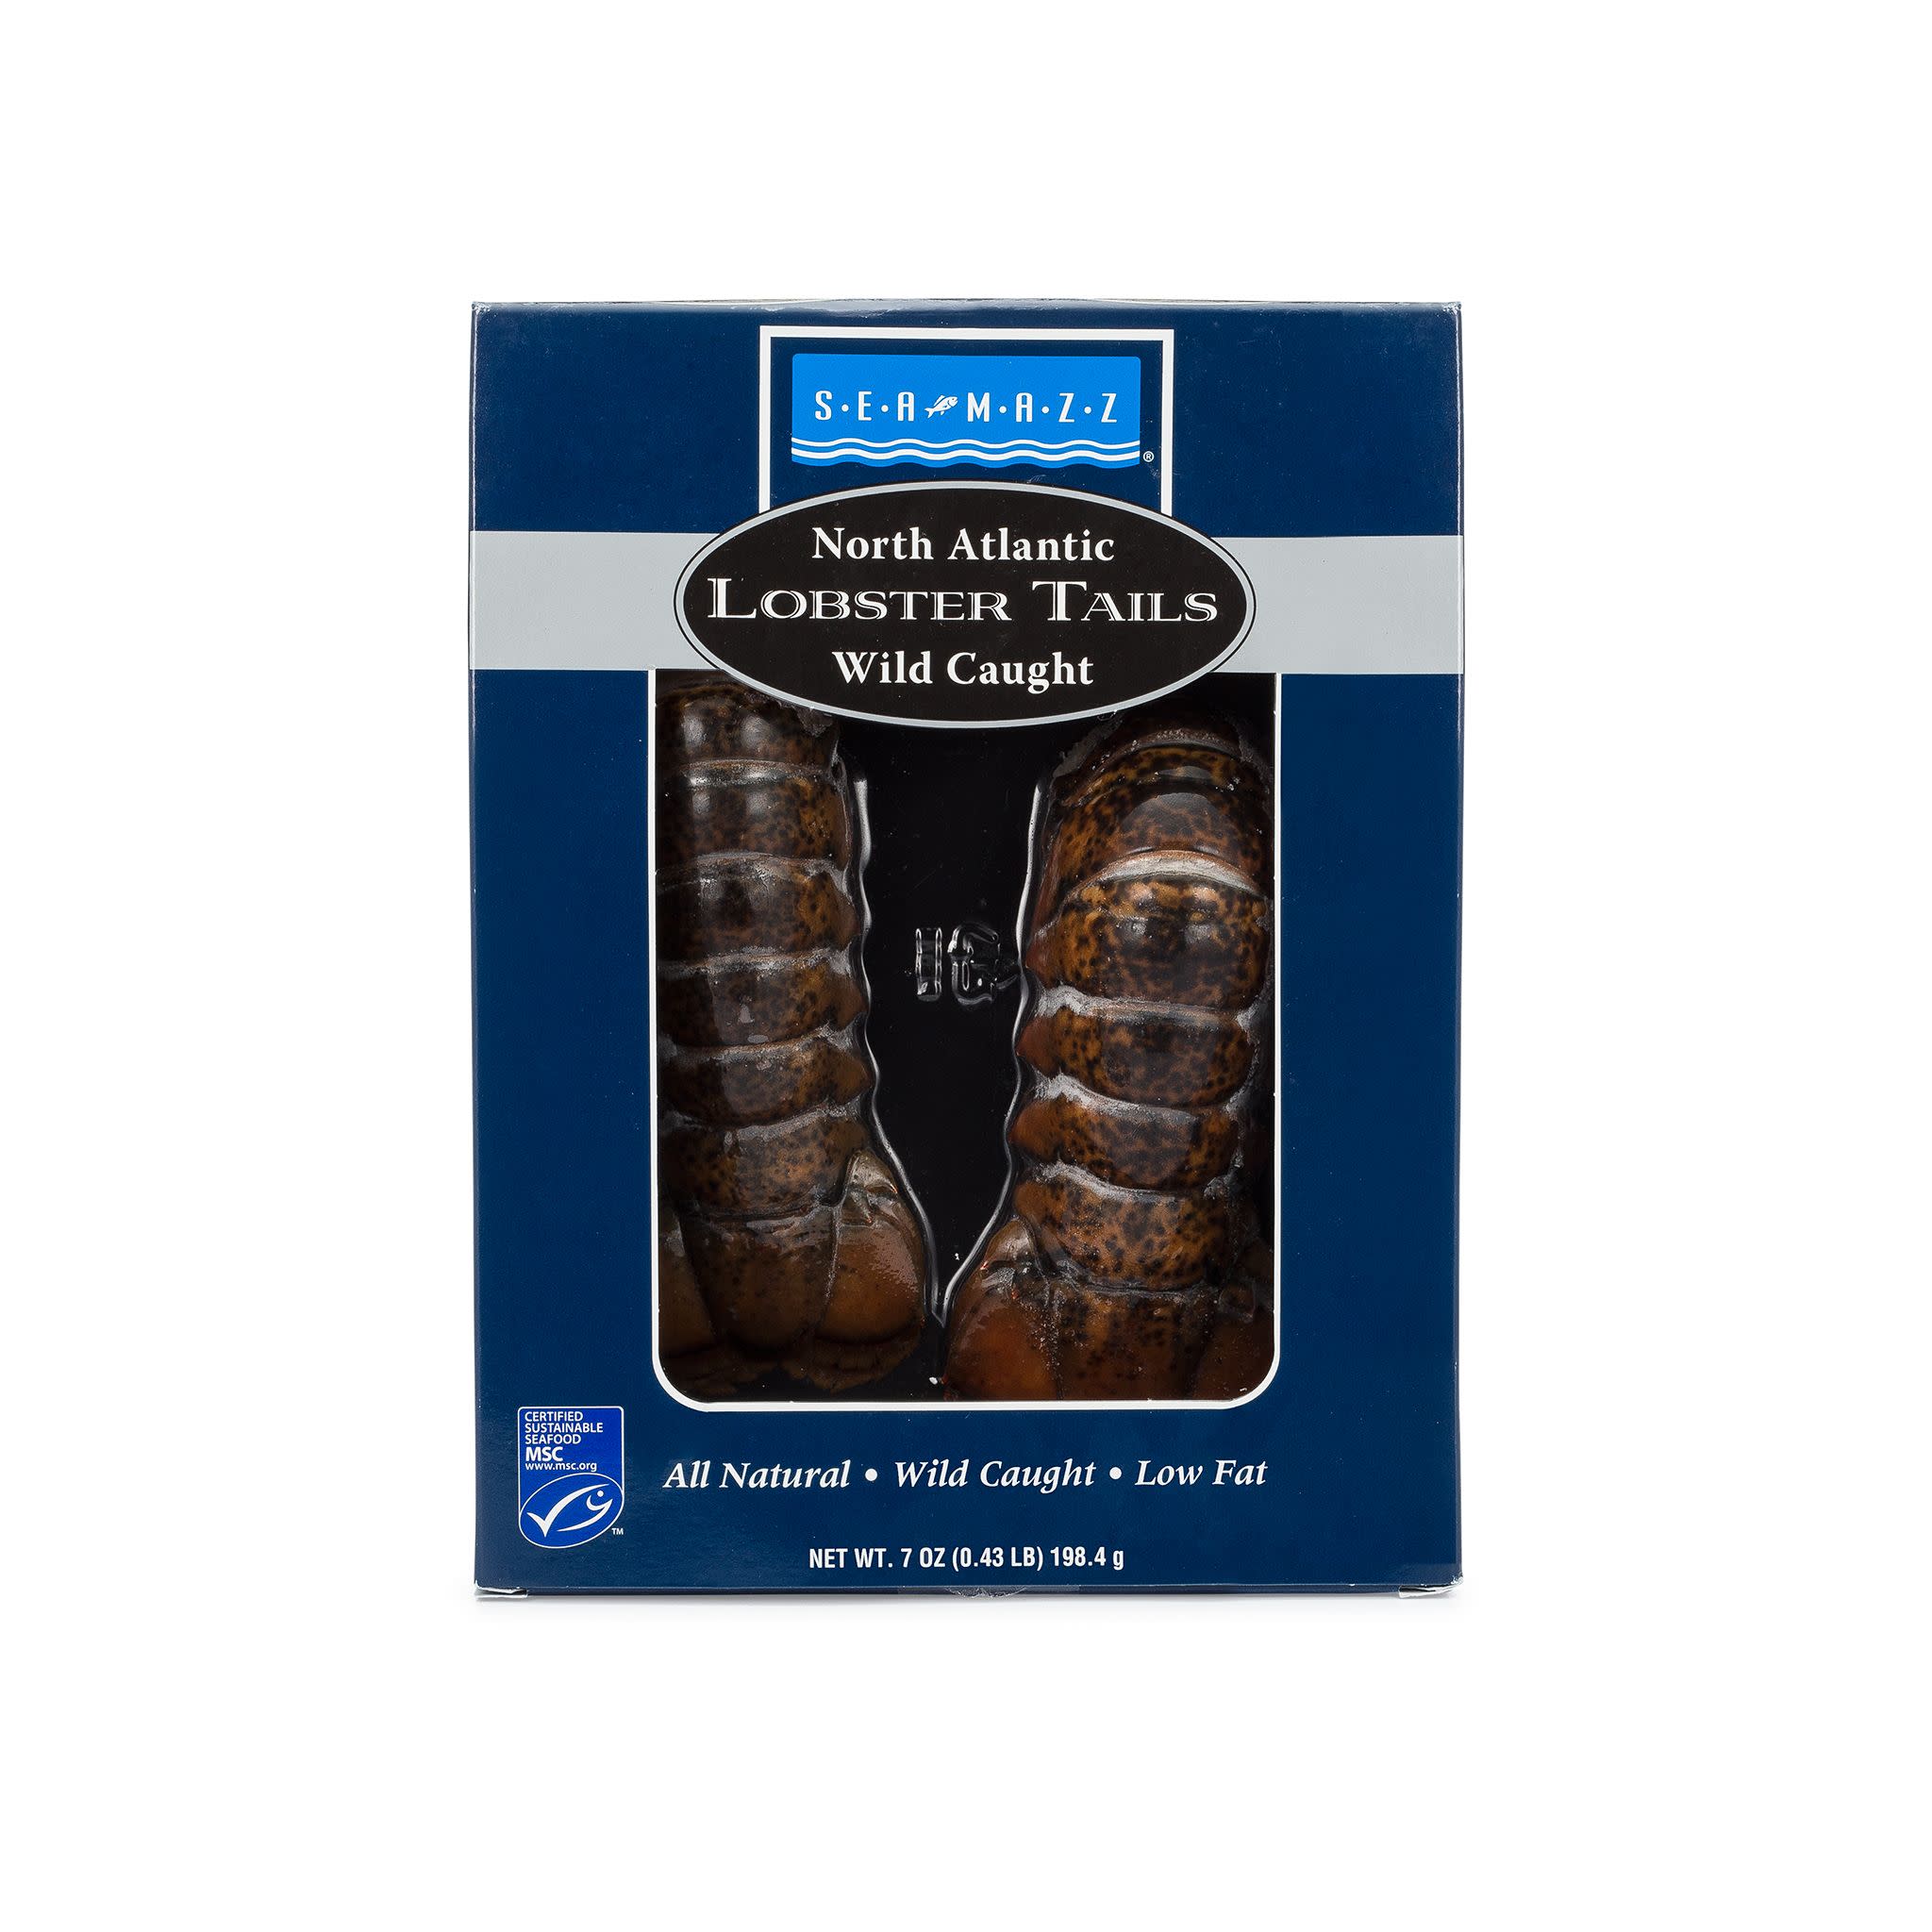 6058 WF PACKAGED North Atlantic Lobster Tails Seafood